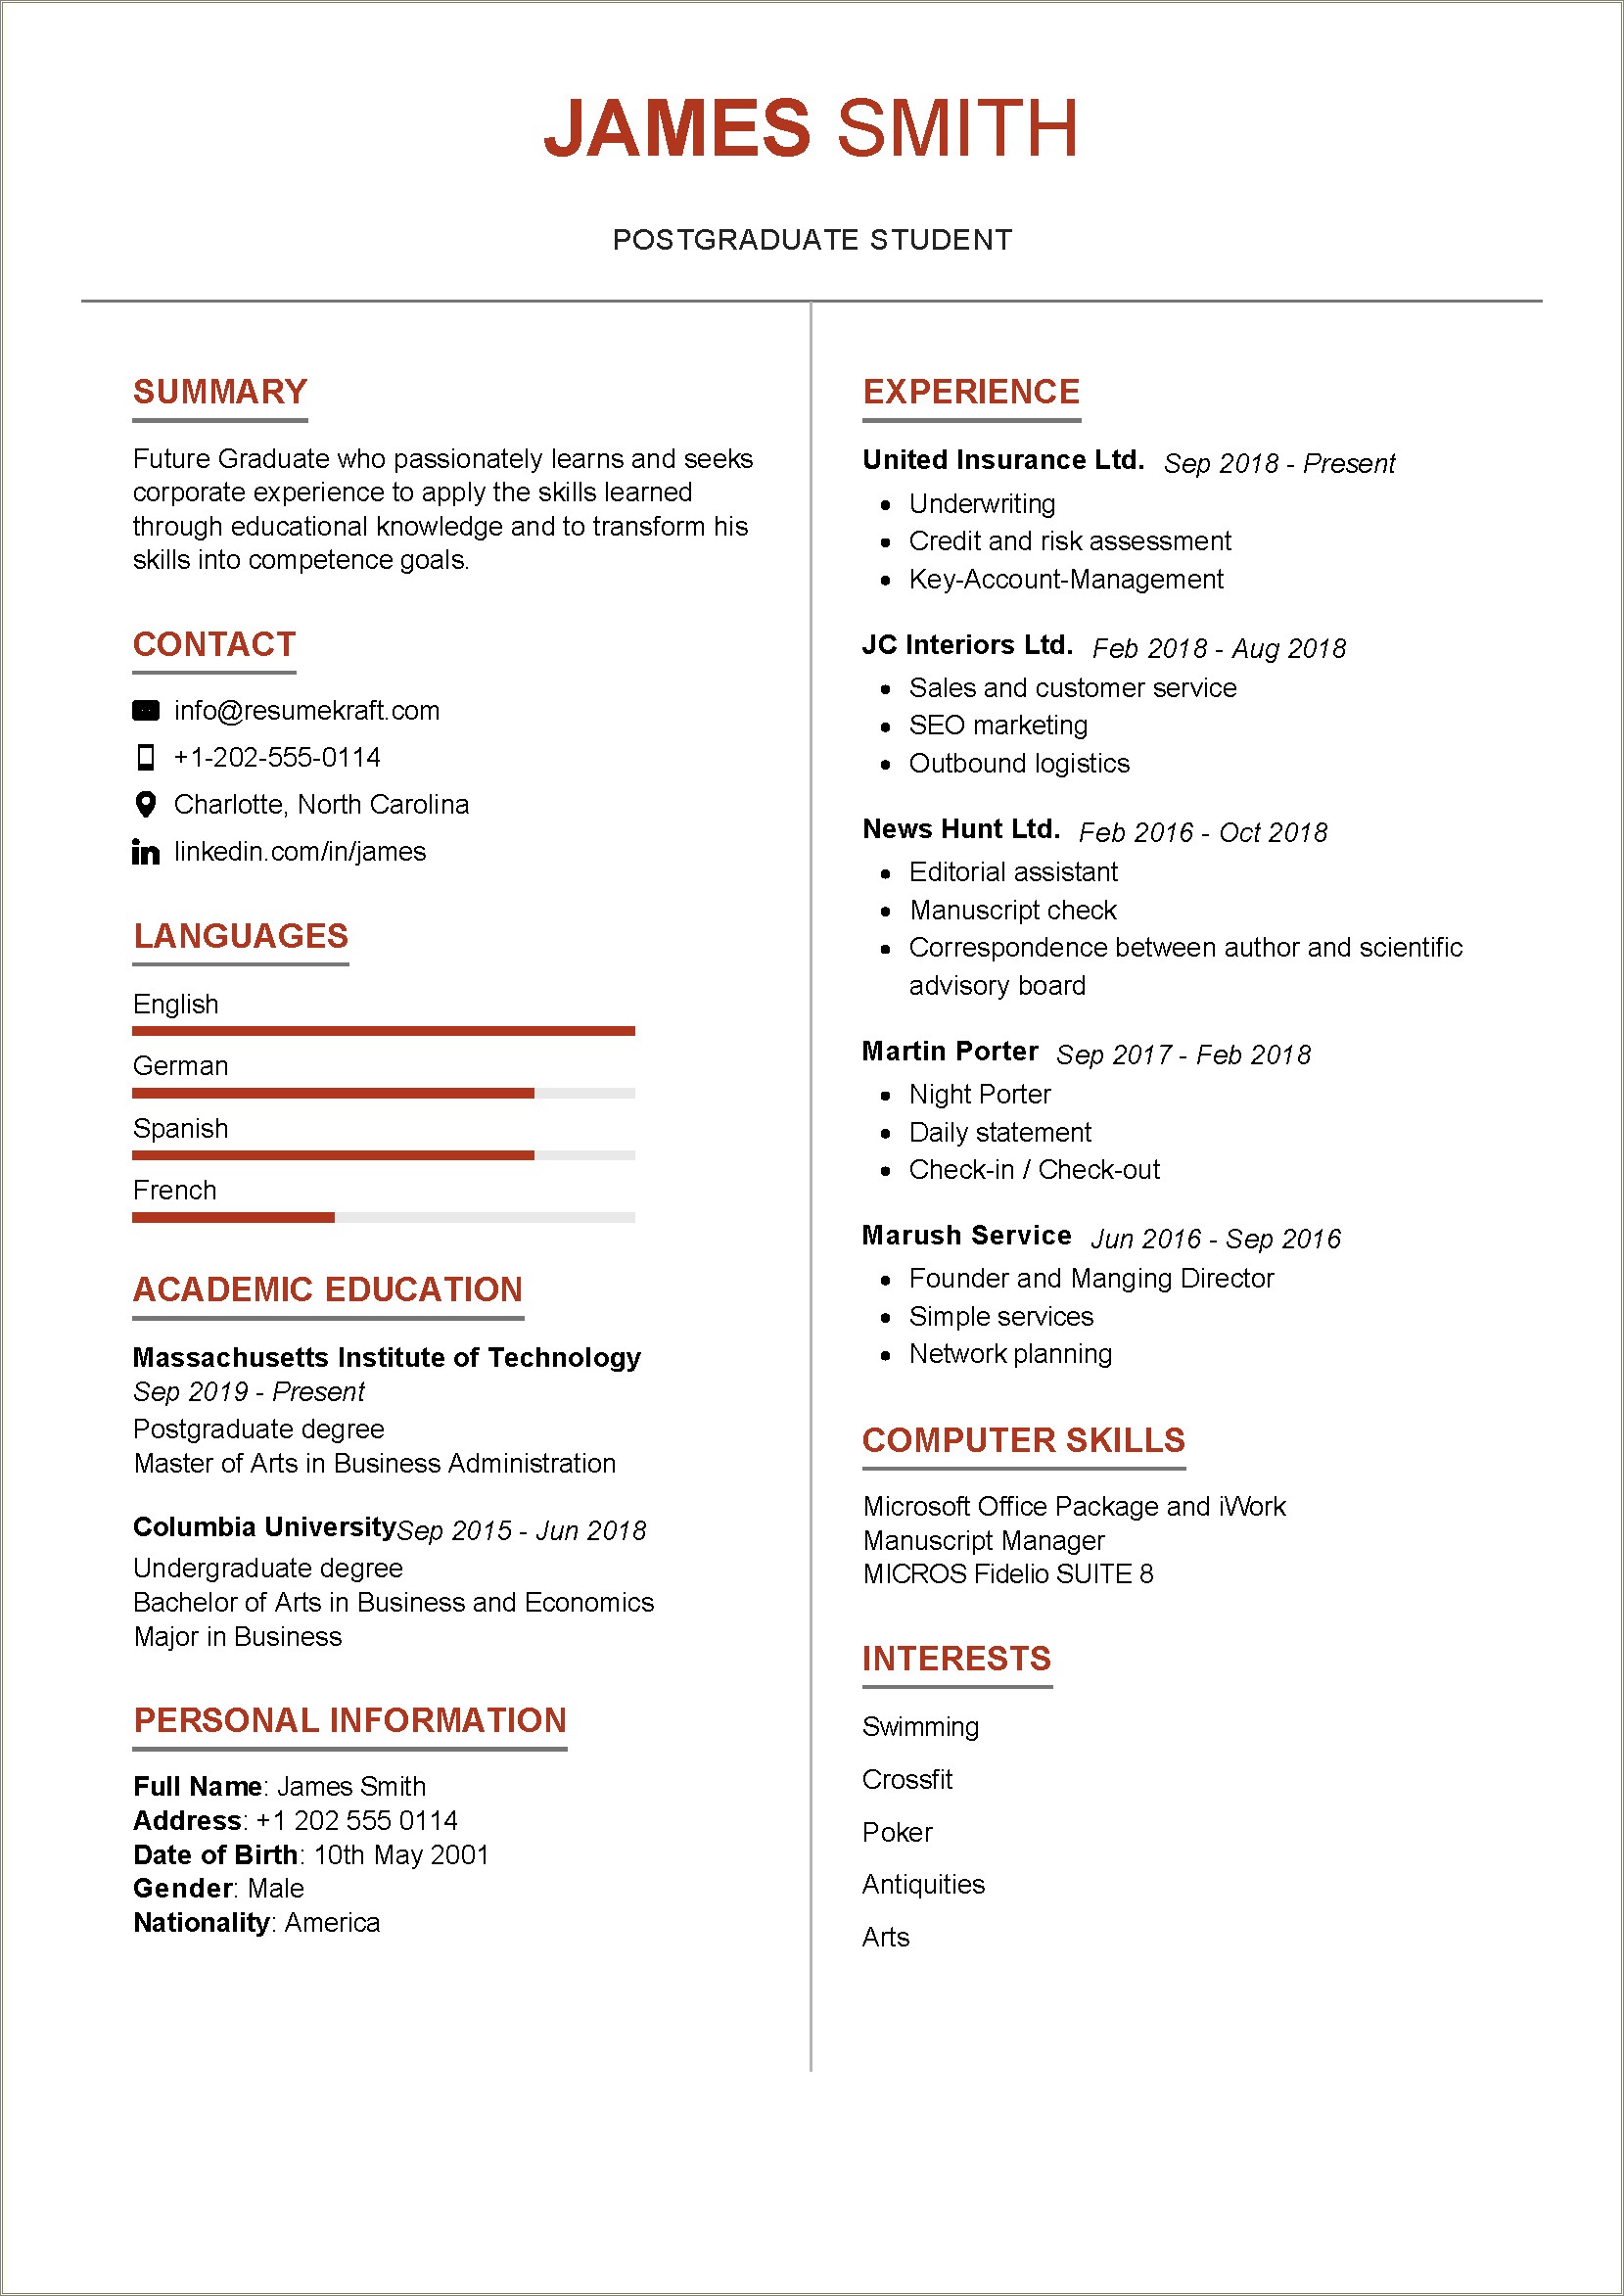 Resume Example For Graduating College Students